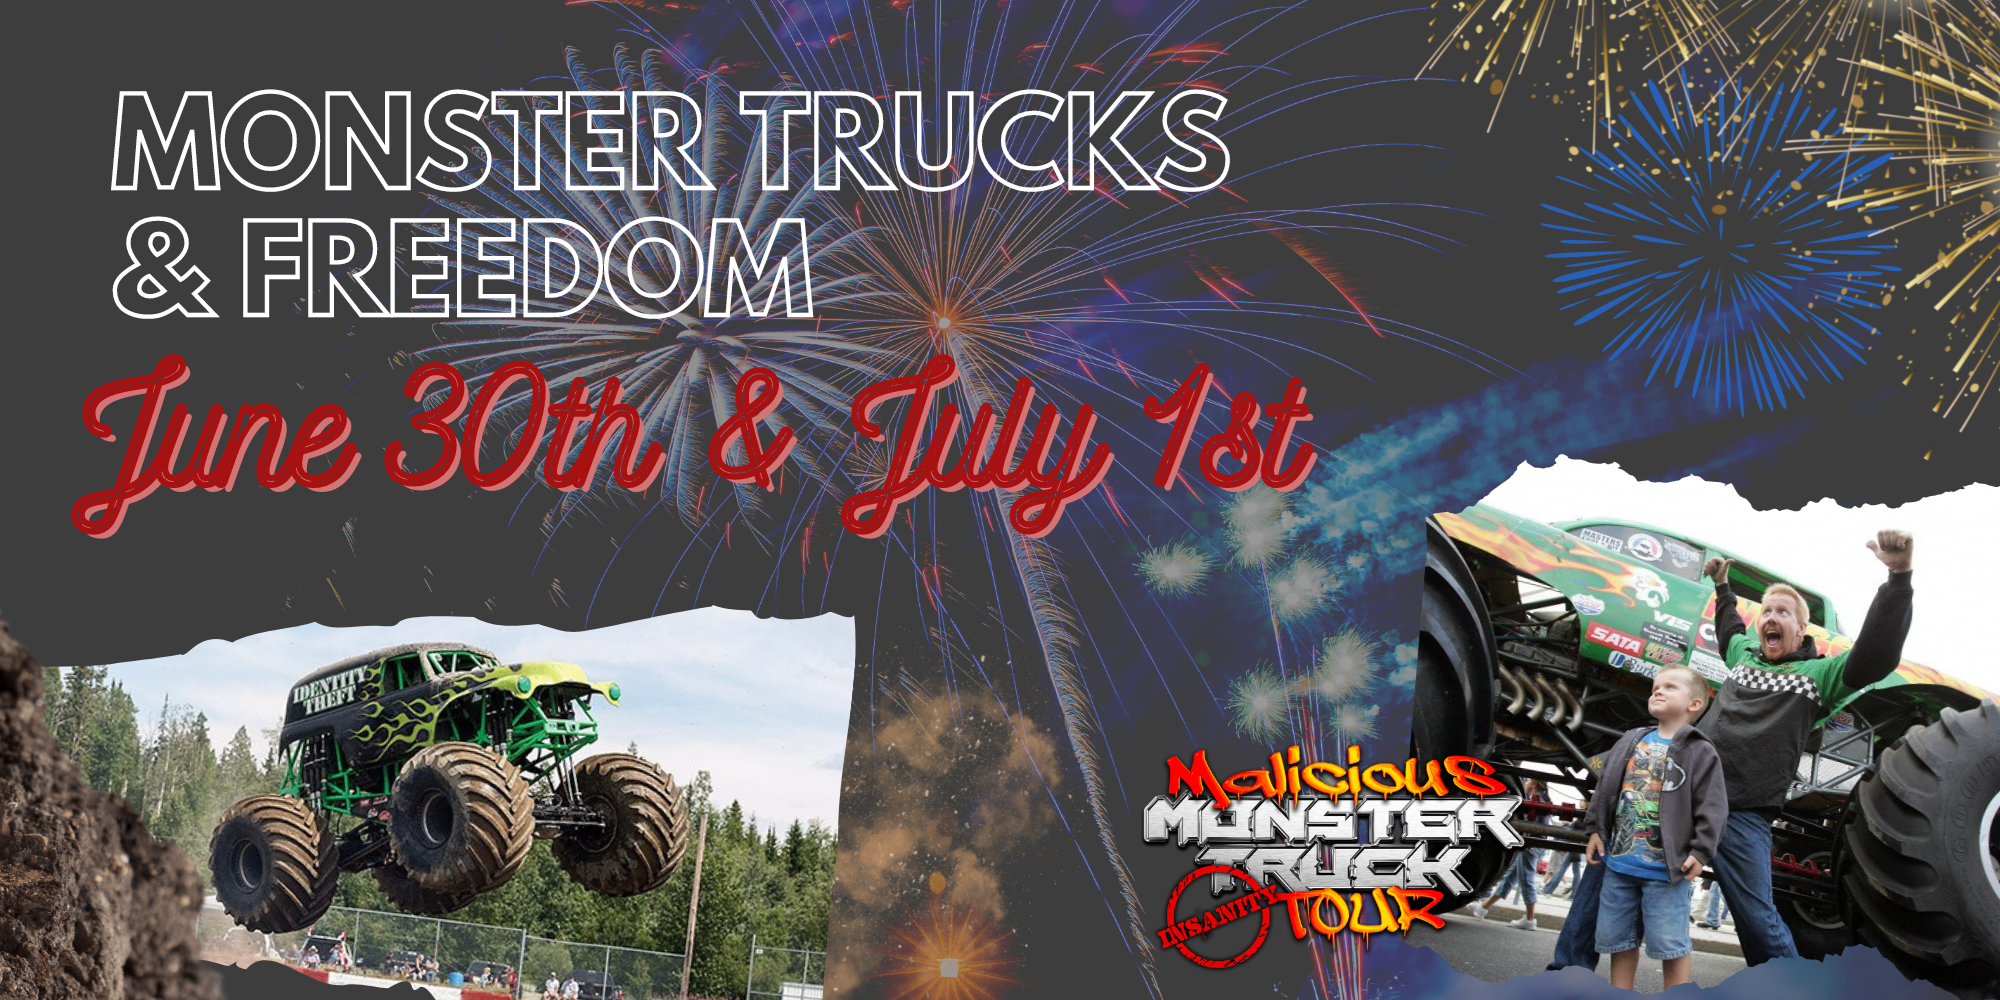 <h1 class="tribe-events-single-event-title">Monster Trucks & Freedom</h1>